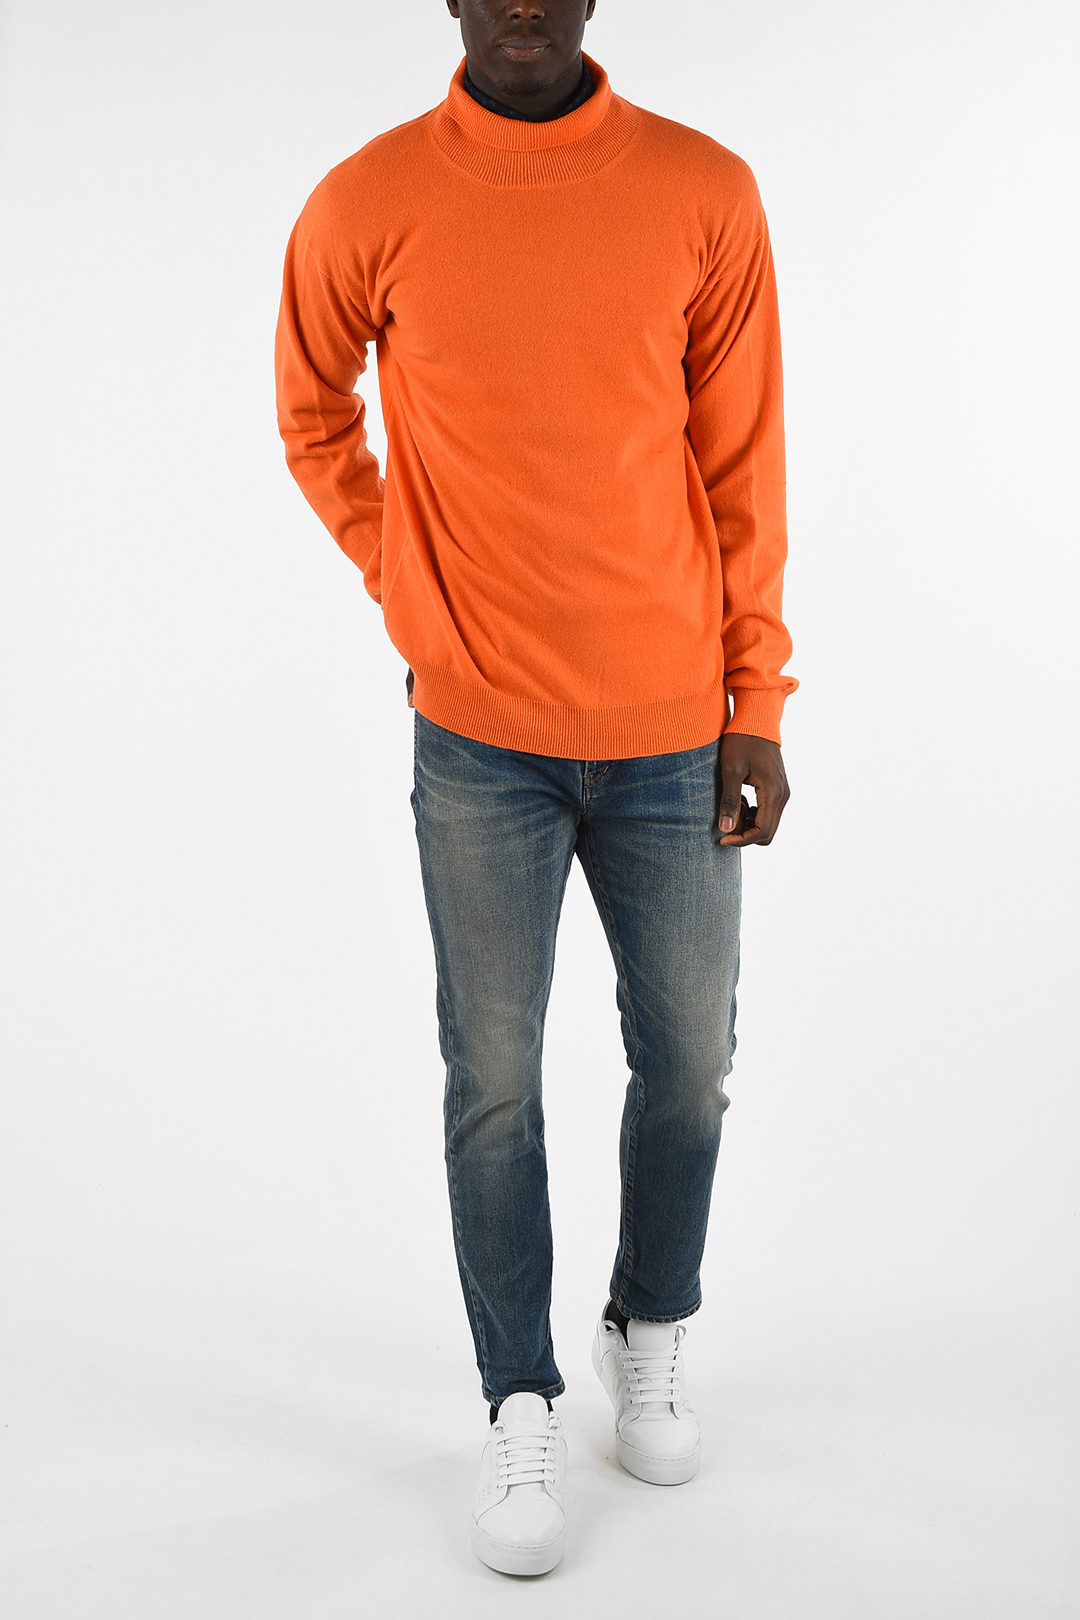 Calvin Klein Wool And Cashmere Turtle-Neck Sweater men - Glamood Outlet